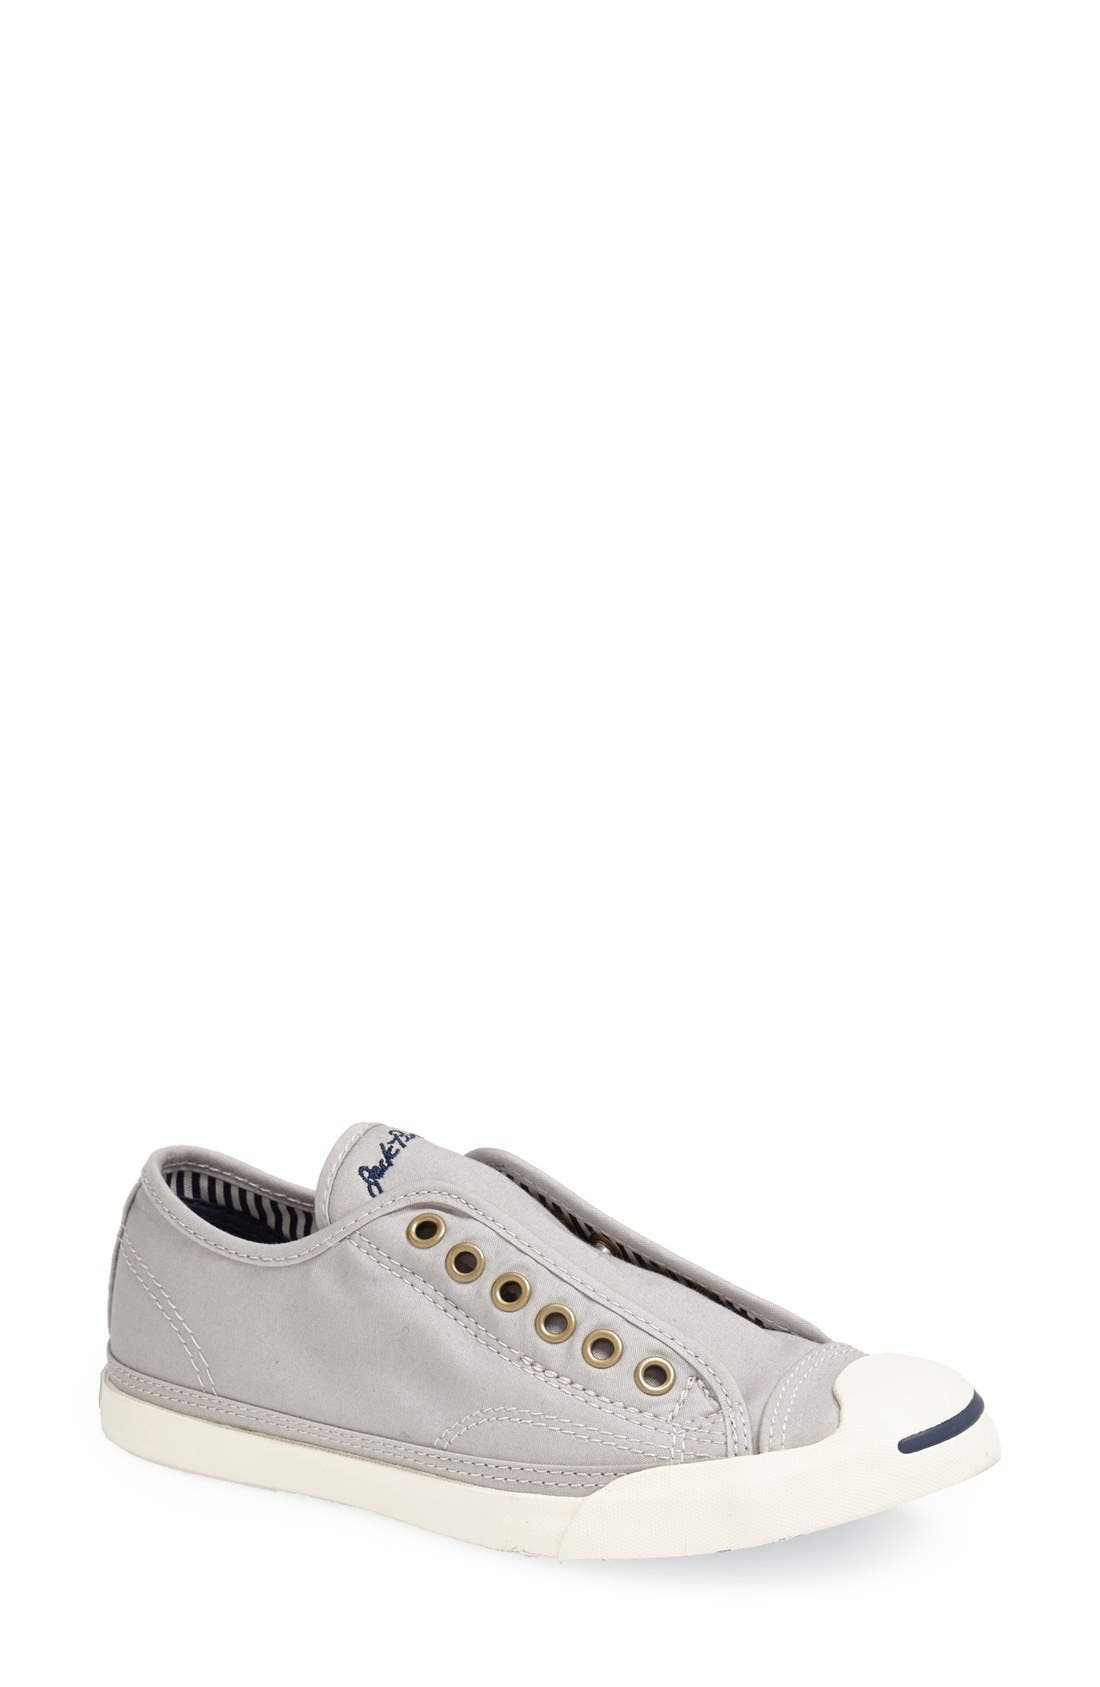 Converse 'Jack Purcell LP' Sneaker 